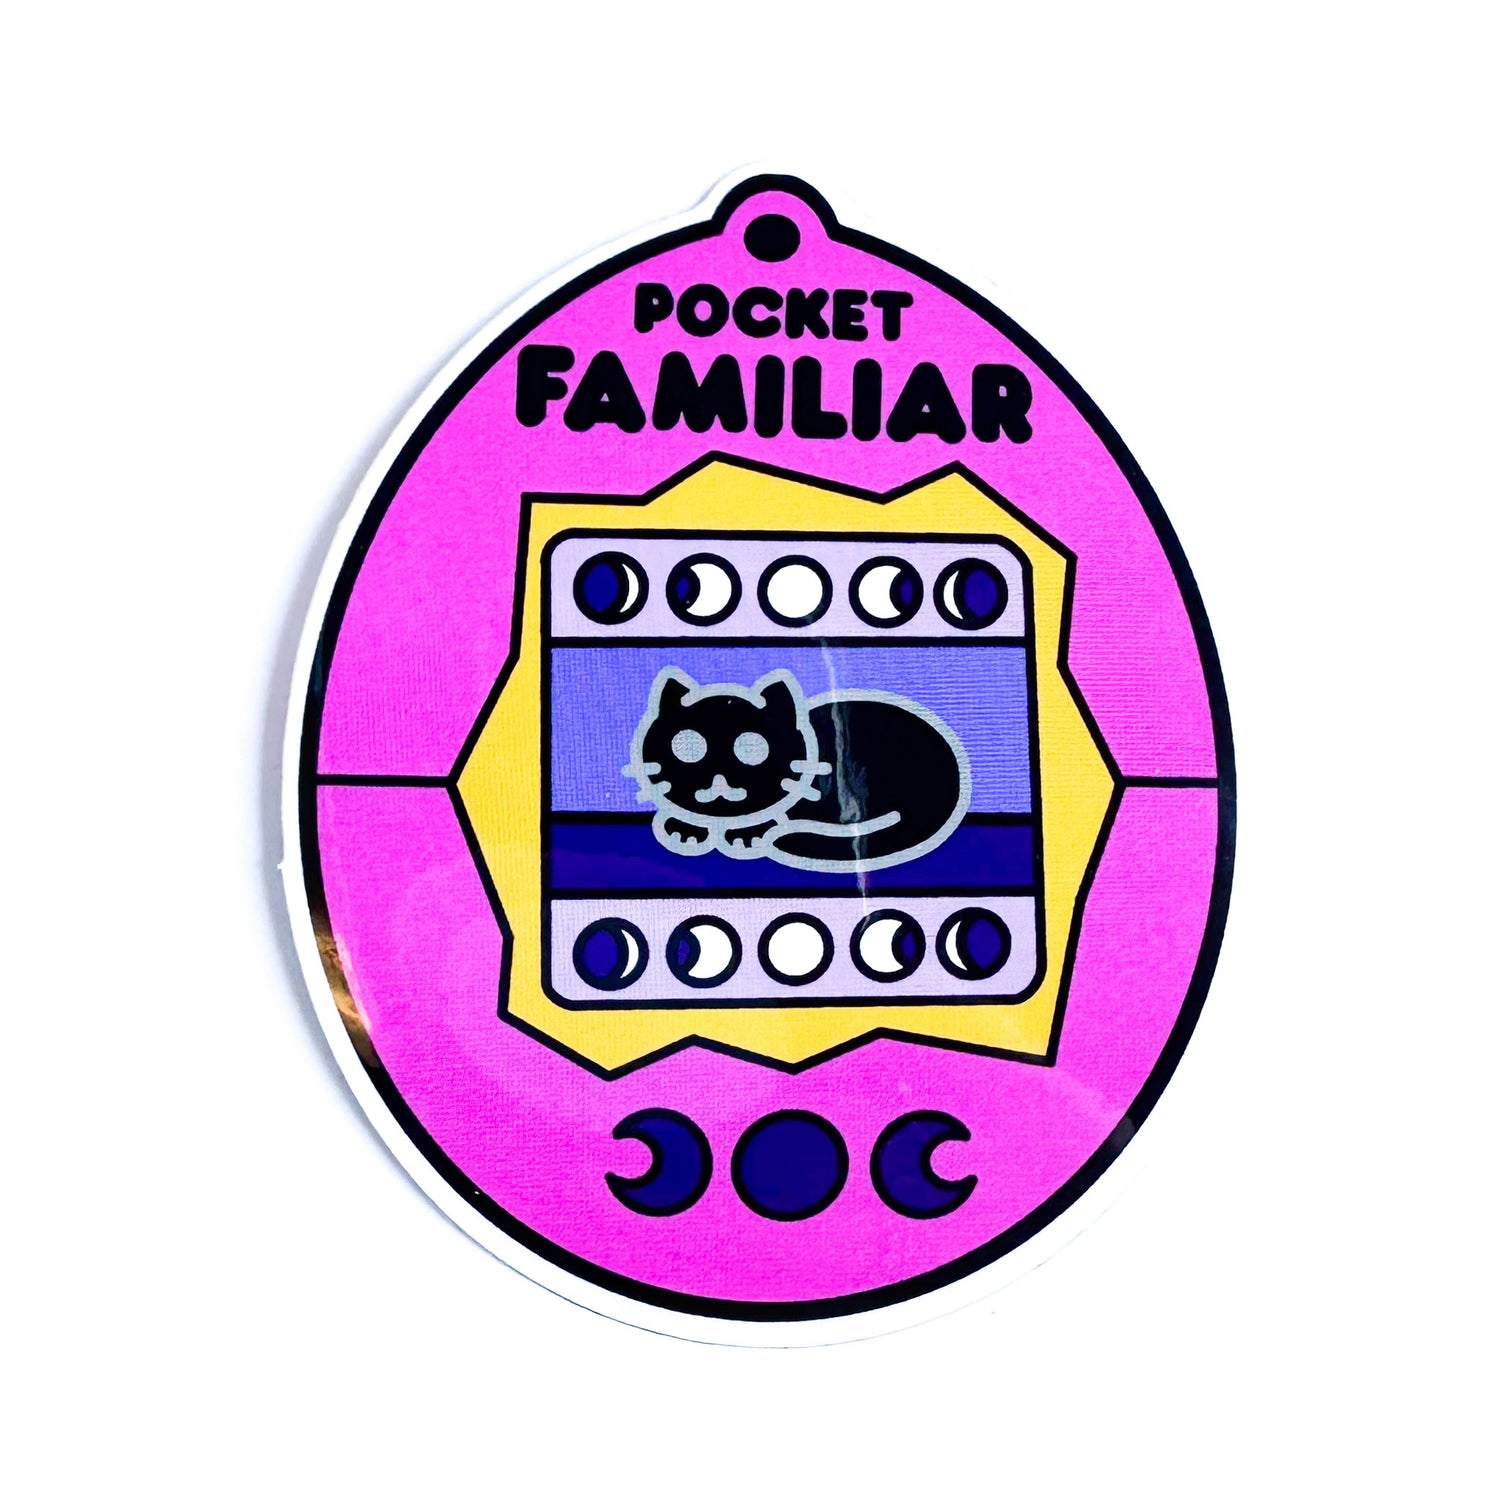 A sticker shaped like a Tamagotchi virtual pet with a black cat on the screen, the shell of the tamagotchi is pink.